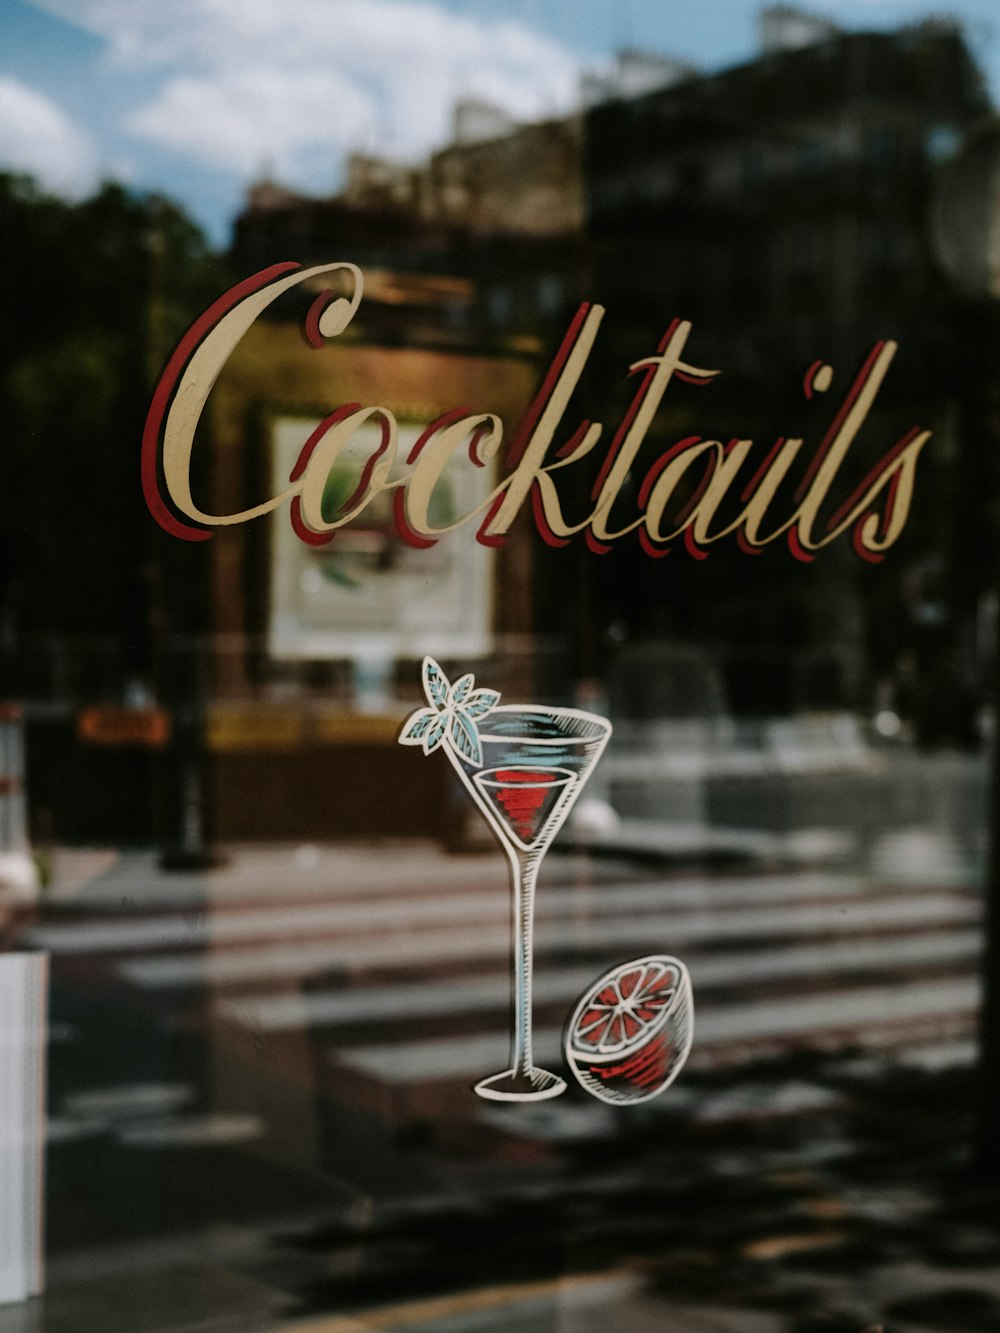 a window with a sign that says cocktails